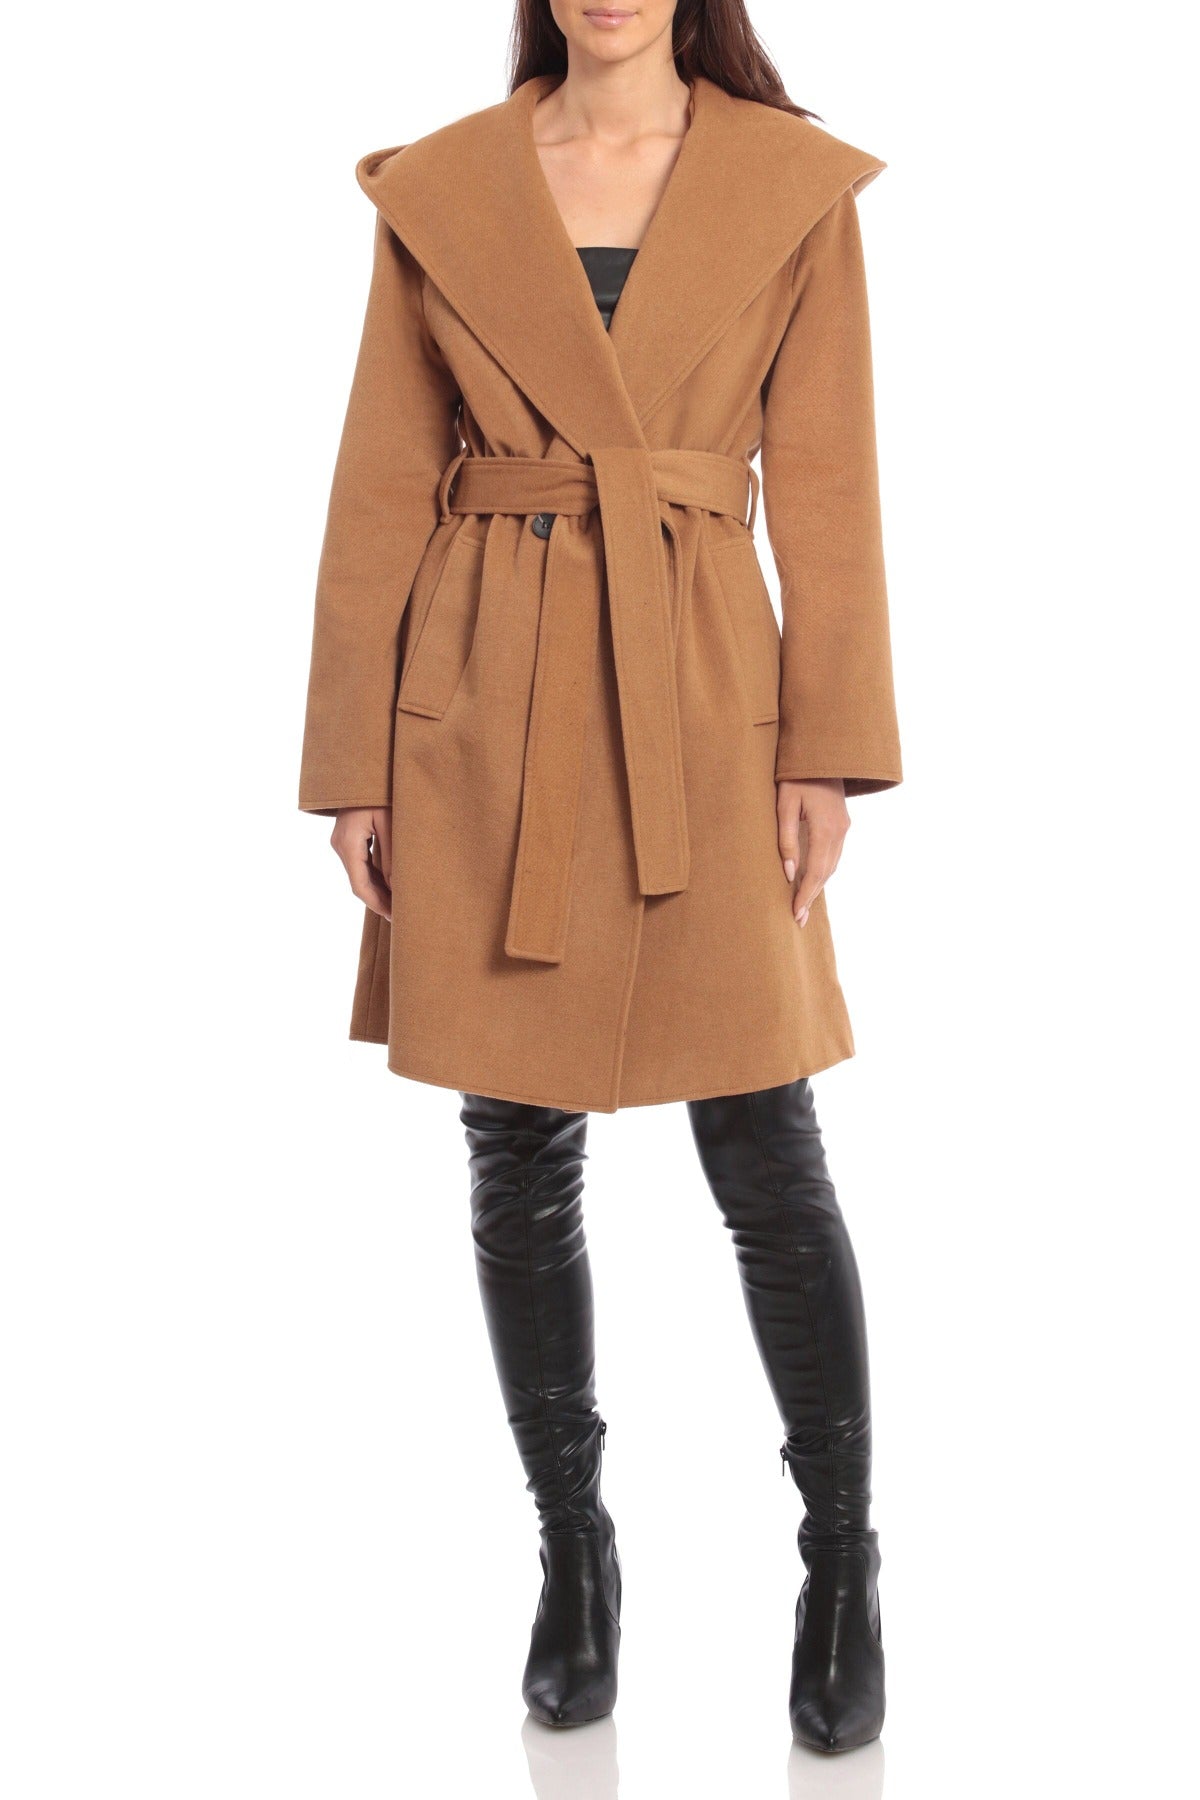 Brown women's hooded wool-blend belted midi coat jacket for Fall 2023 fashion trends by Avec Les Filles